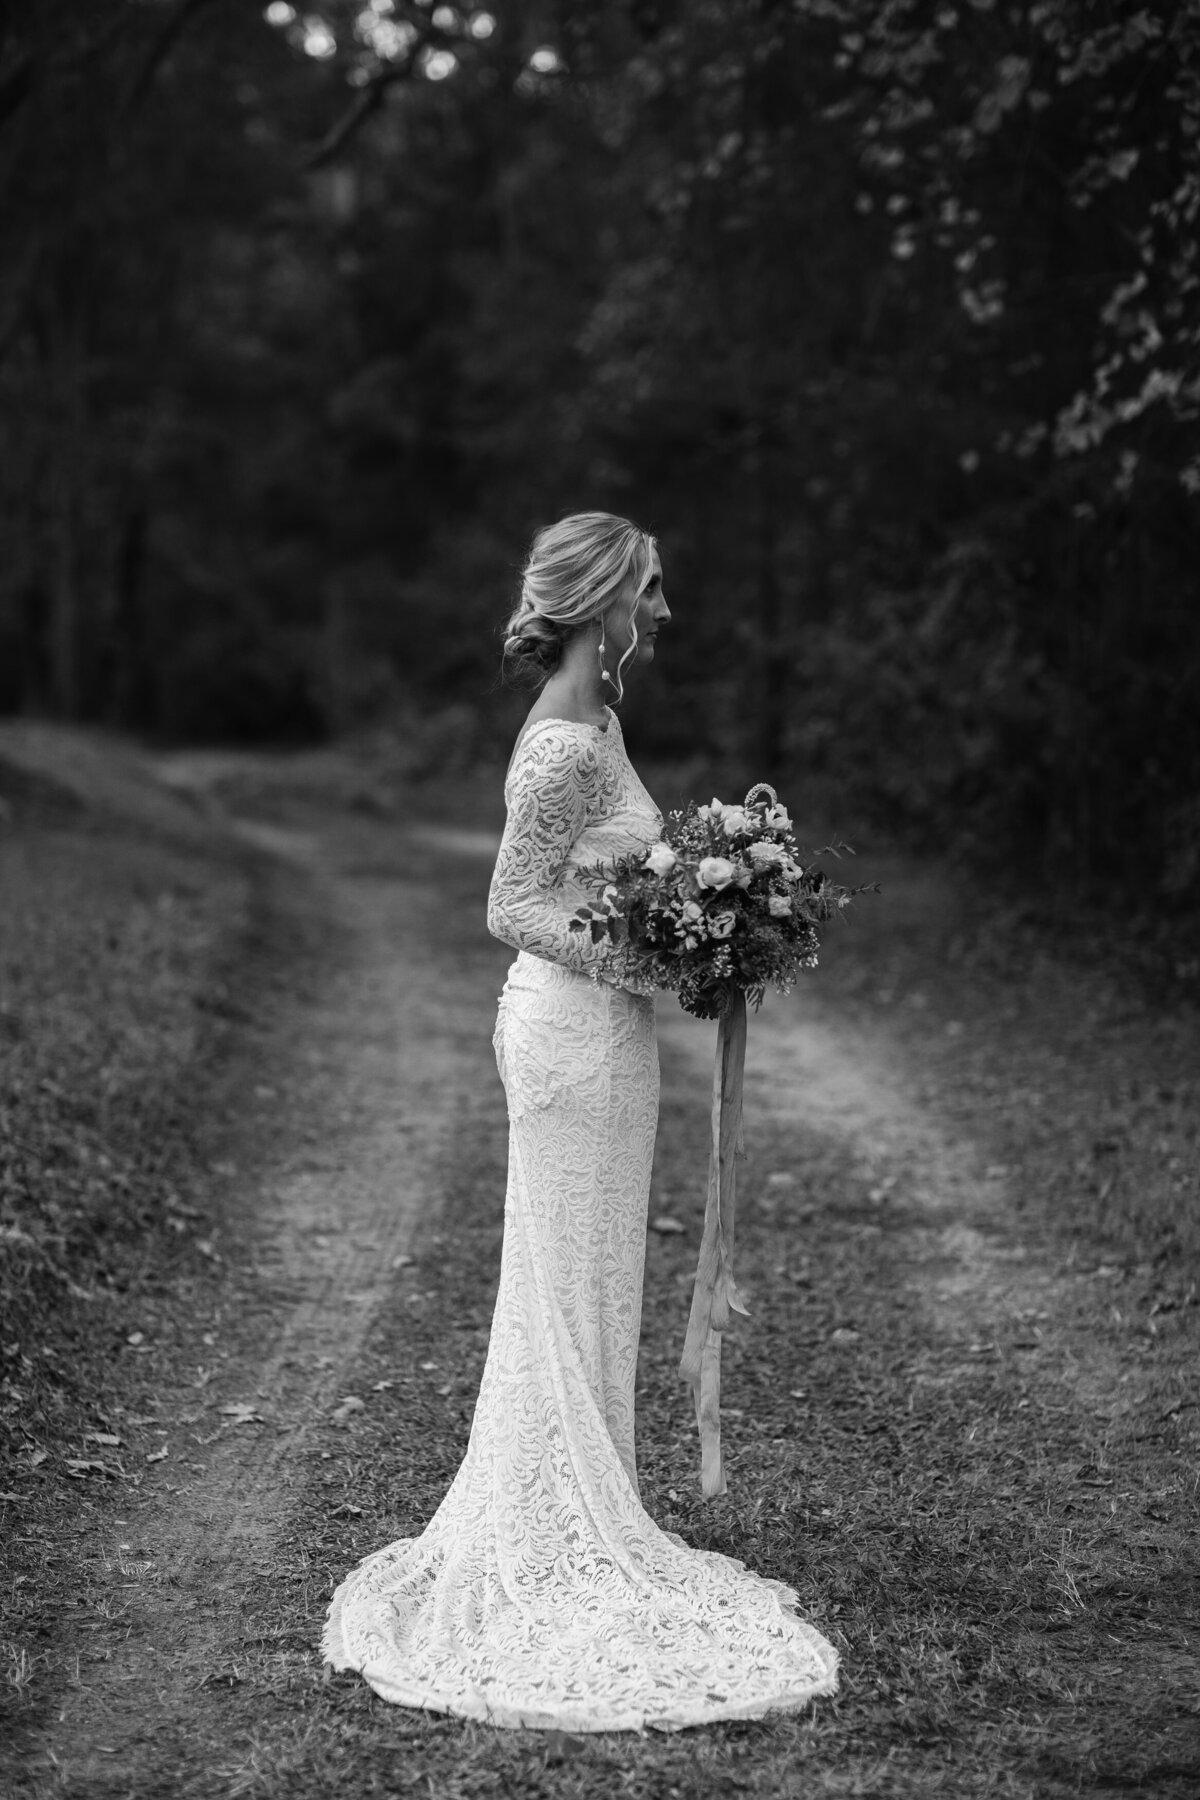 Bridal portrait on a tree lined path